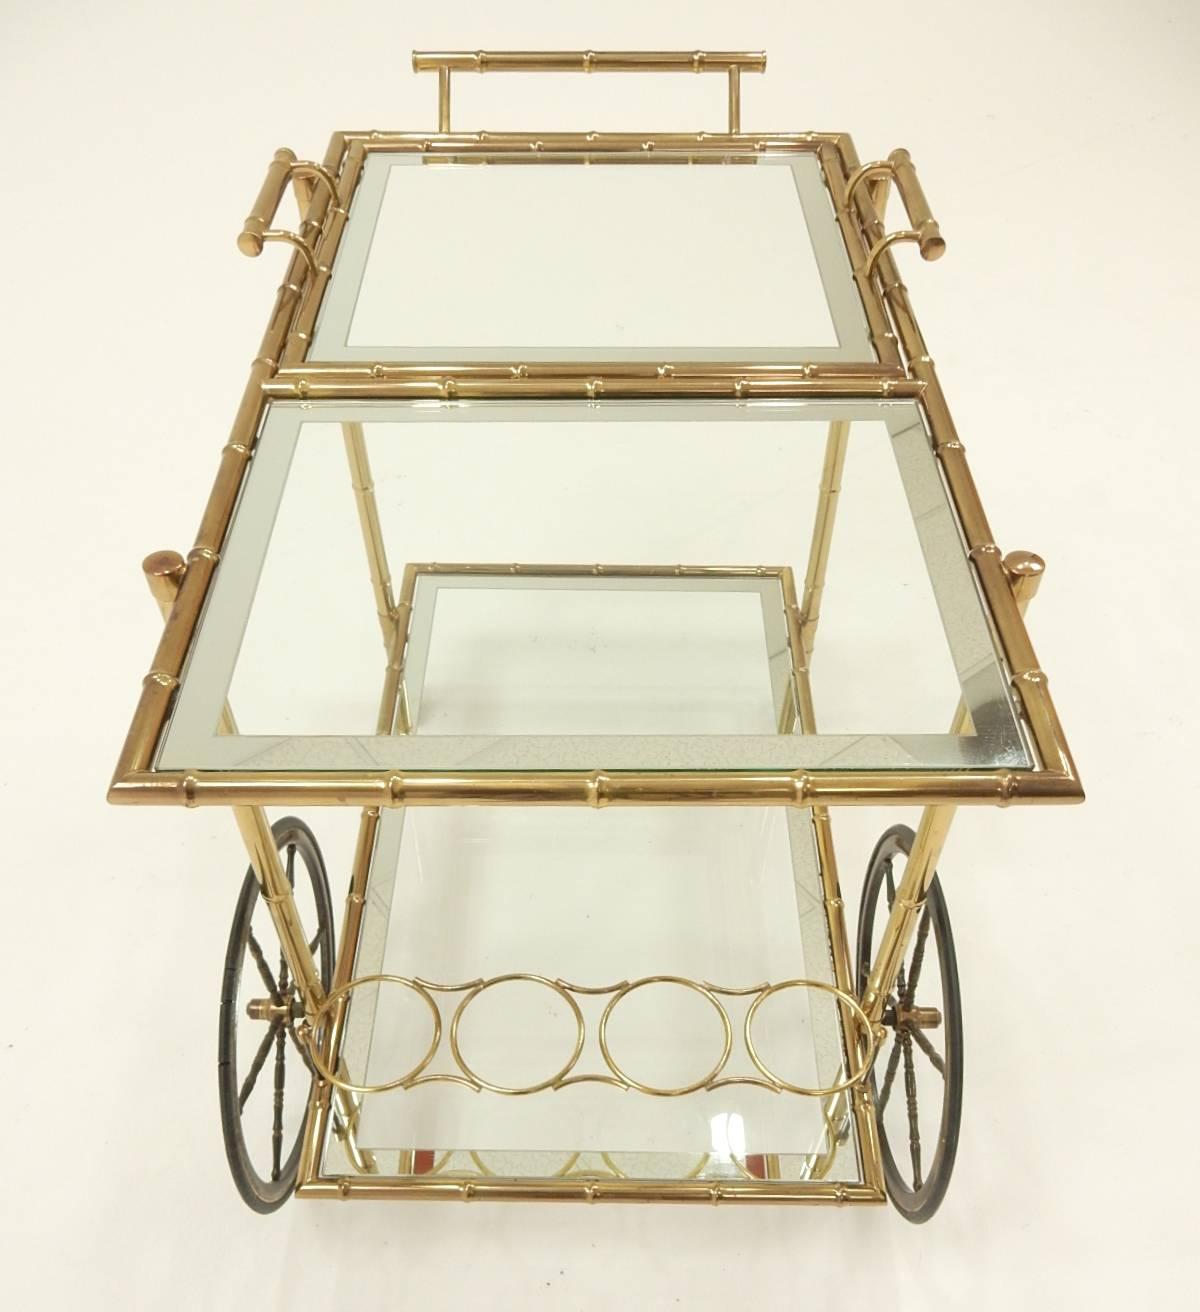 Brass faux bamboo bar cart with mirror edge glass, circa 1960s.
Three ring bottle/decanter holder in lower section.
Top half is removable tray with handles for serving prepared drinks.
Large spoke front wheel with smaller spoke rear